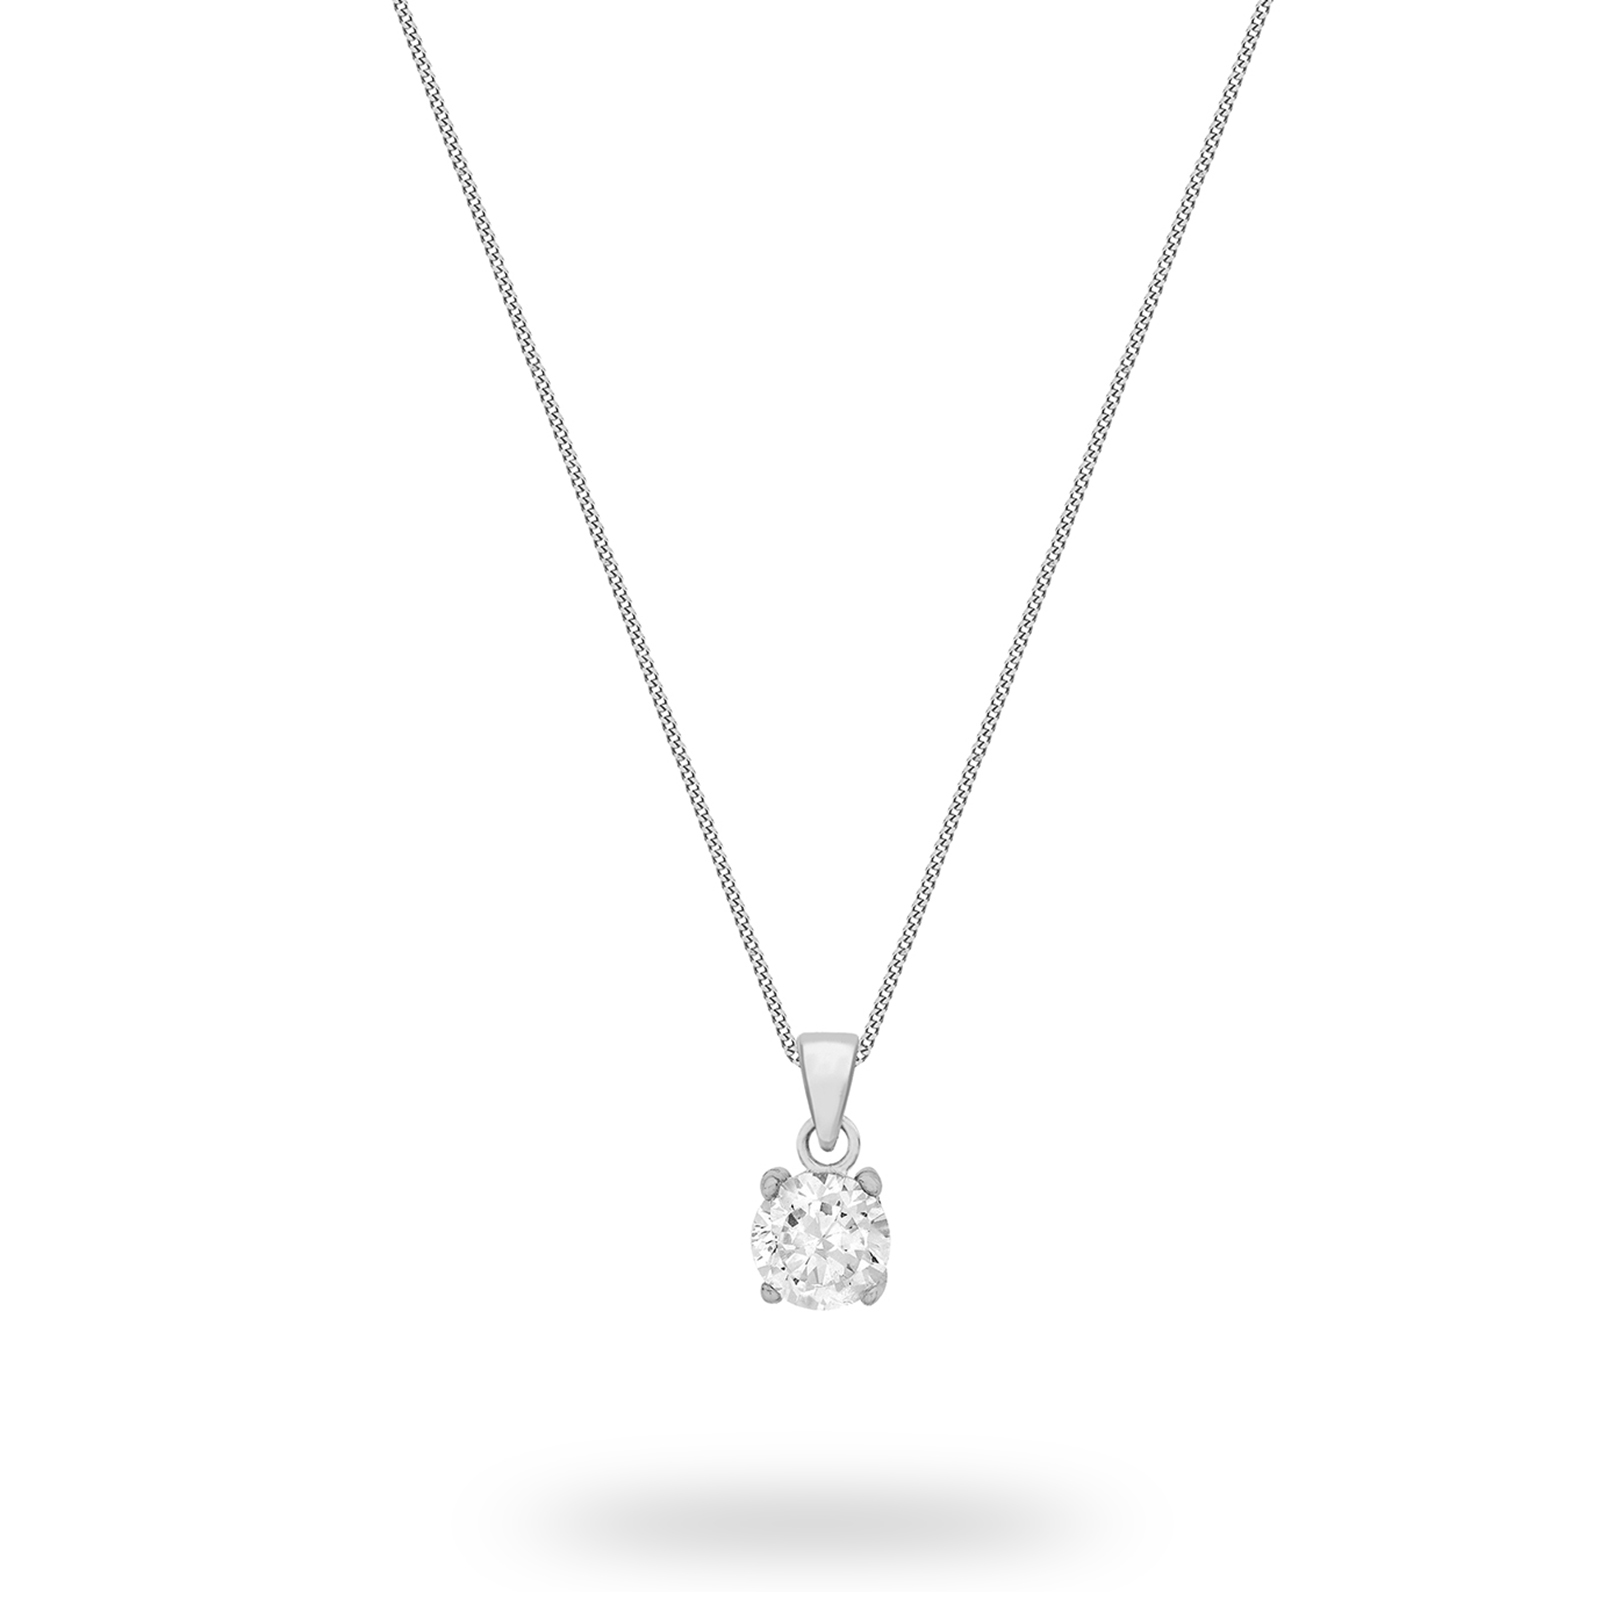 Silver 7mm Round Crystal Pendant | Necklaces | Jewellery | Goldsmiths